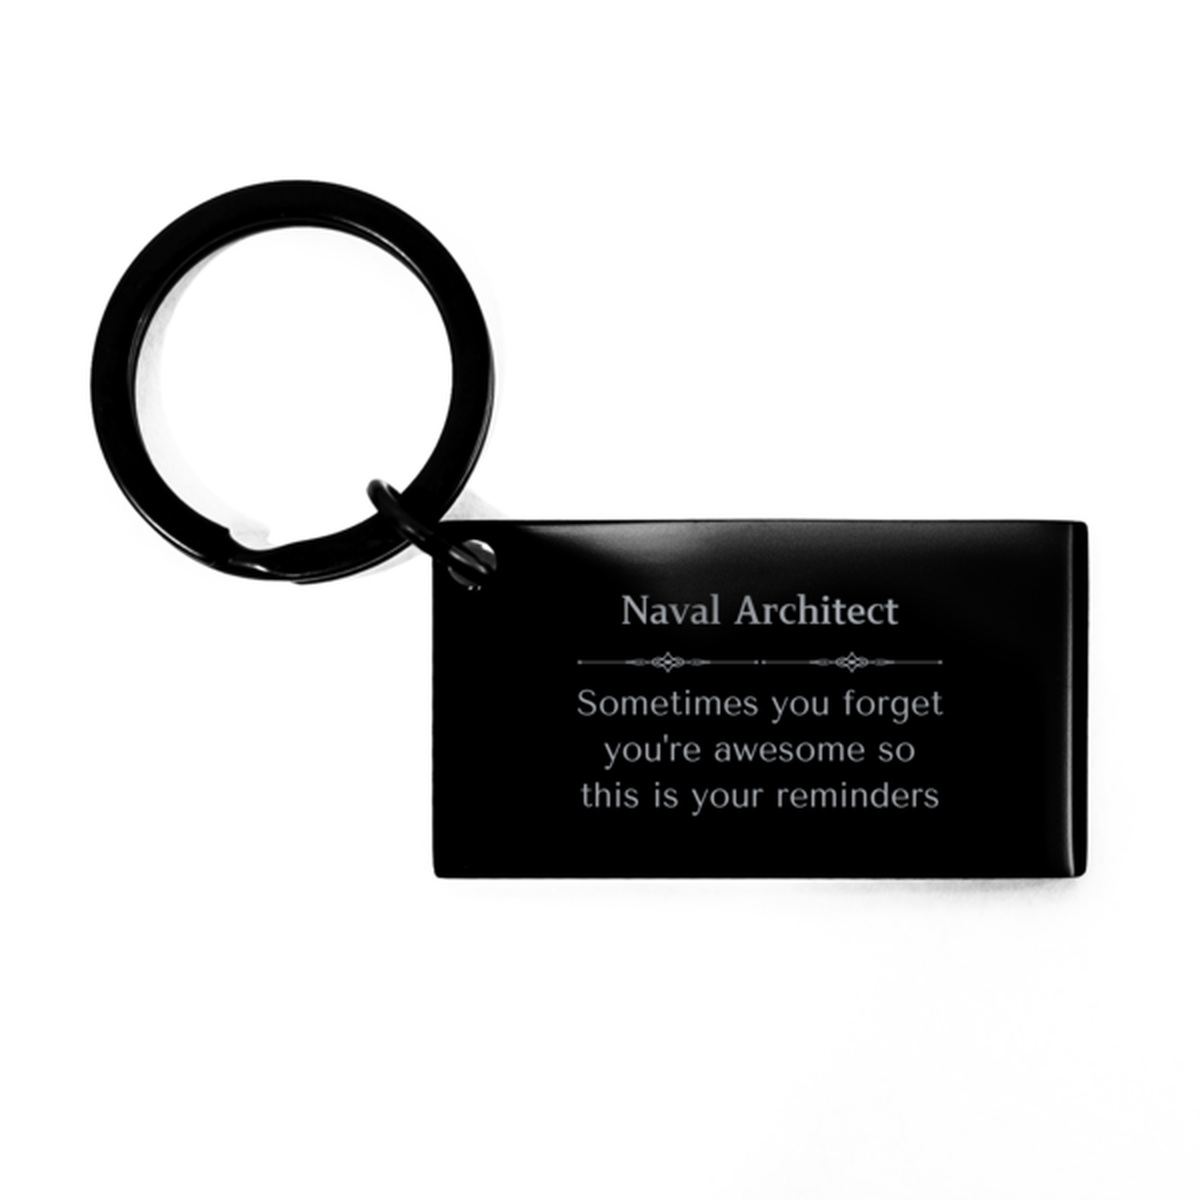 Sentimental Naval Architect Keychain, Payroll Clerk Sometimes you forget you're awesome so this is your reminders, Graduation Christmas Birthday Gifts for Naval Architect, Men, Women, Coworkers